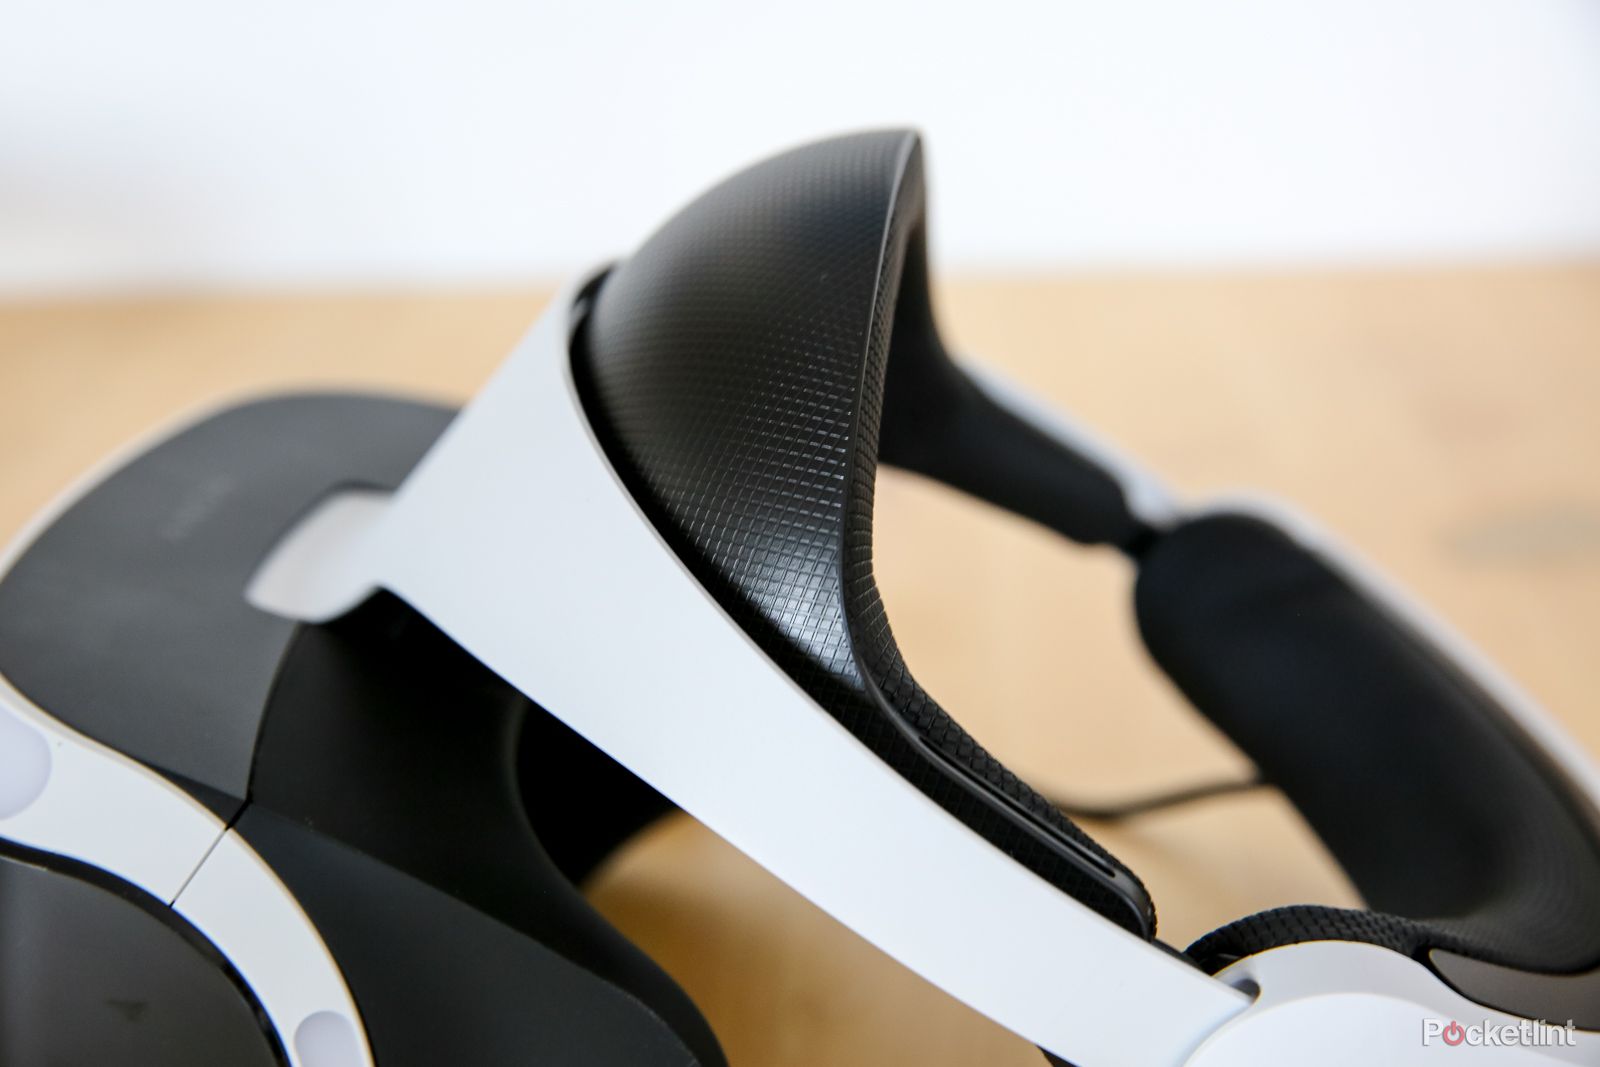 sony playstation vr review image 16